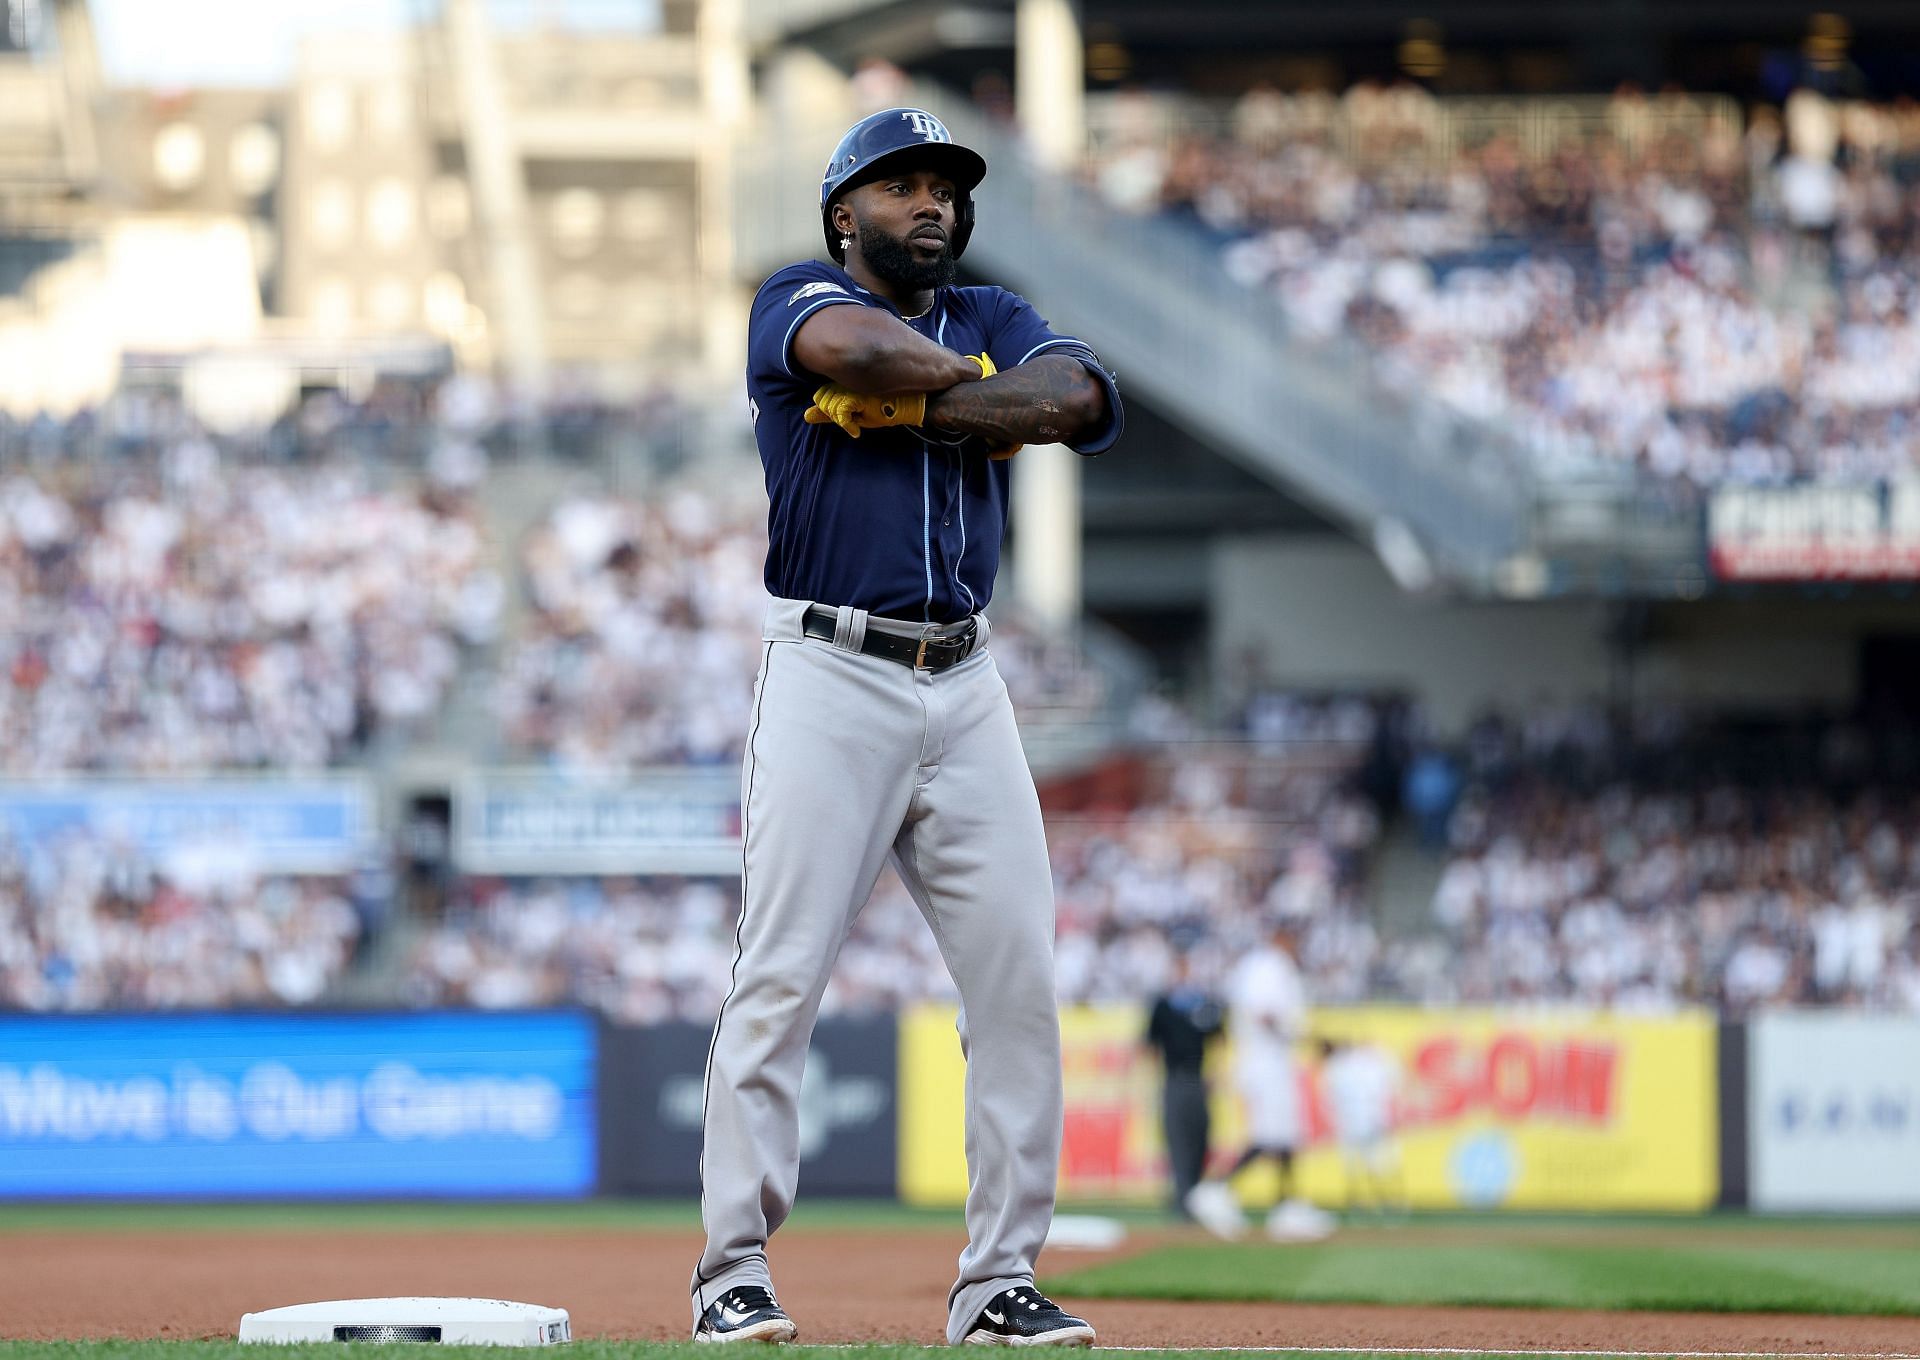 “He’s a guy you just really do not want at the plate when the game is on the line” – LA Dodgers manager Dave Roberts heaps praise on Randy Arozarena